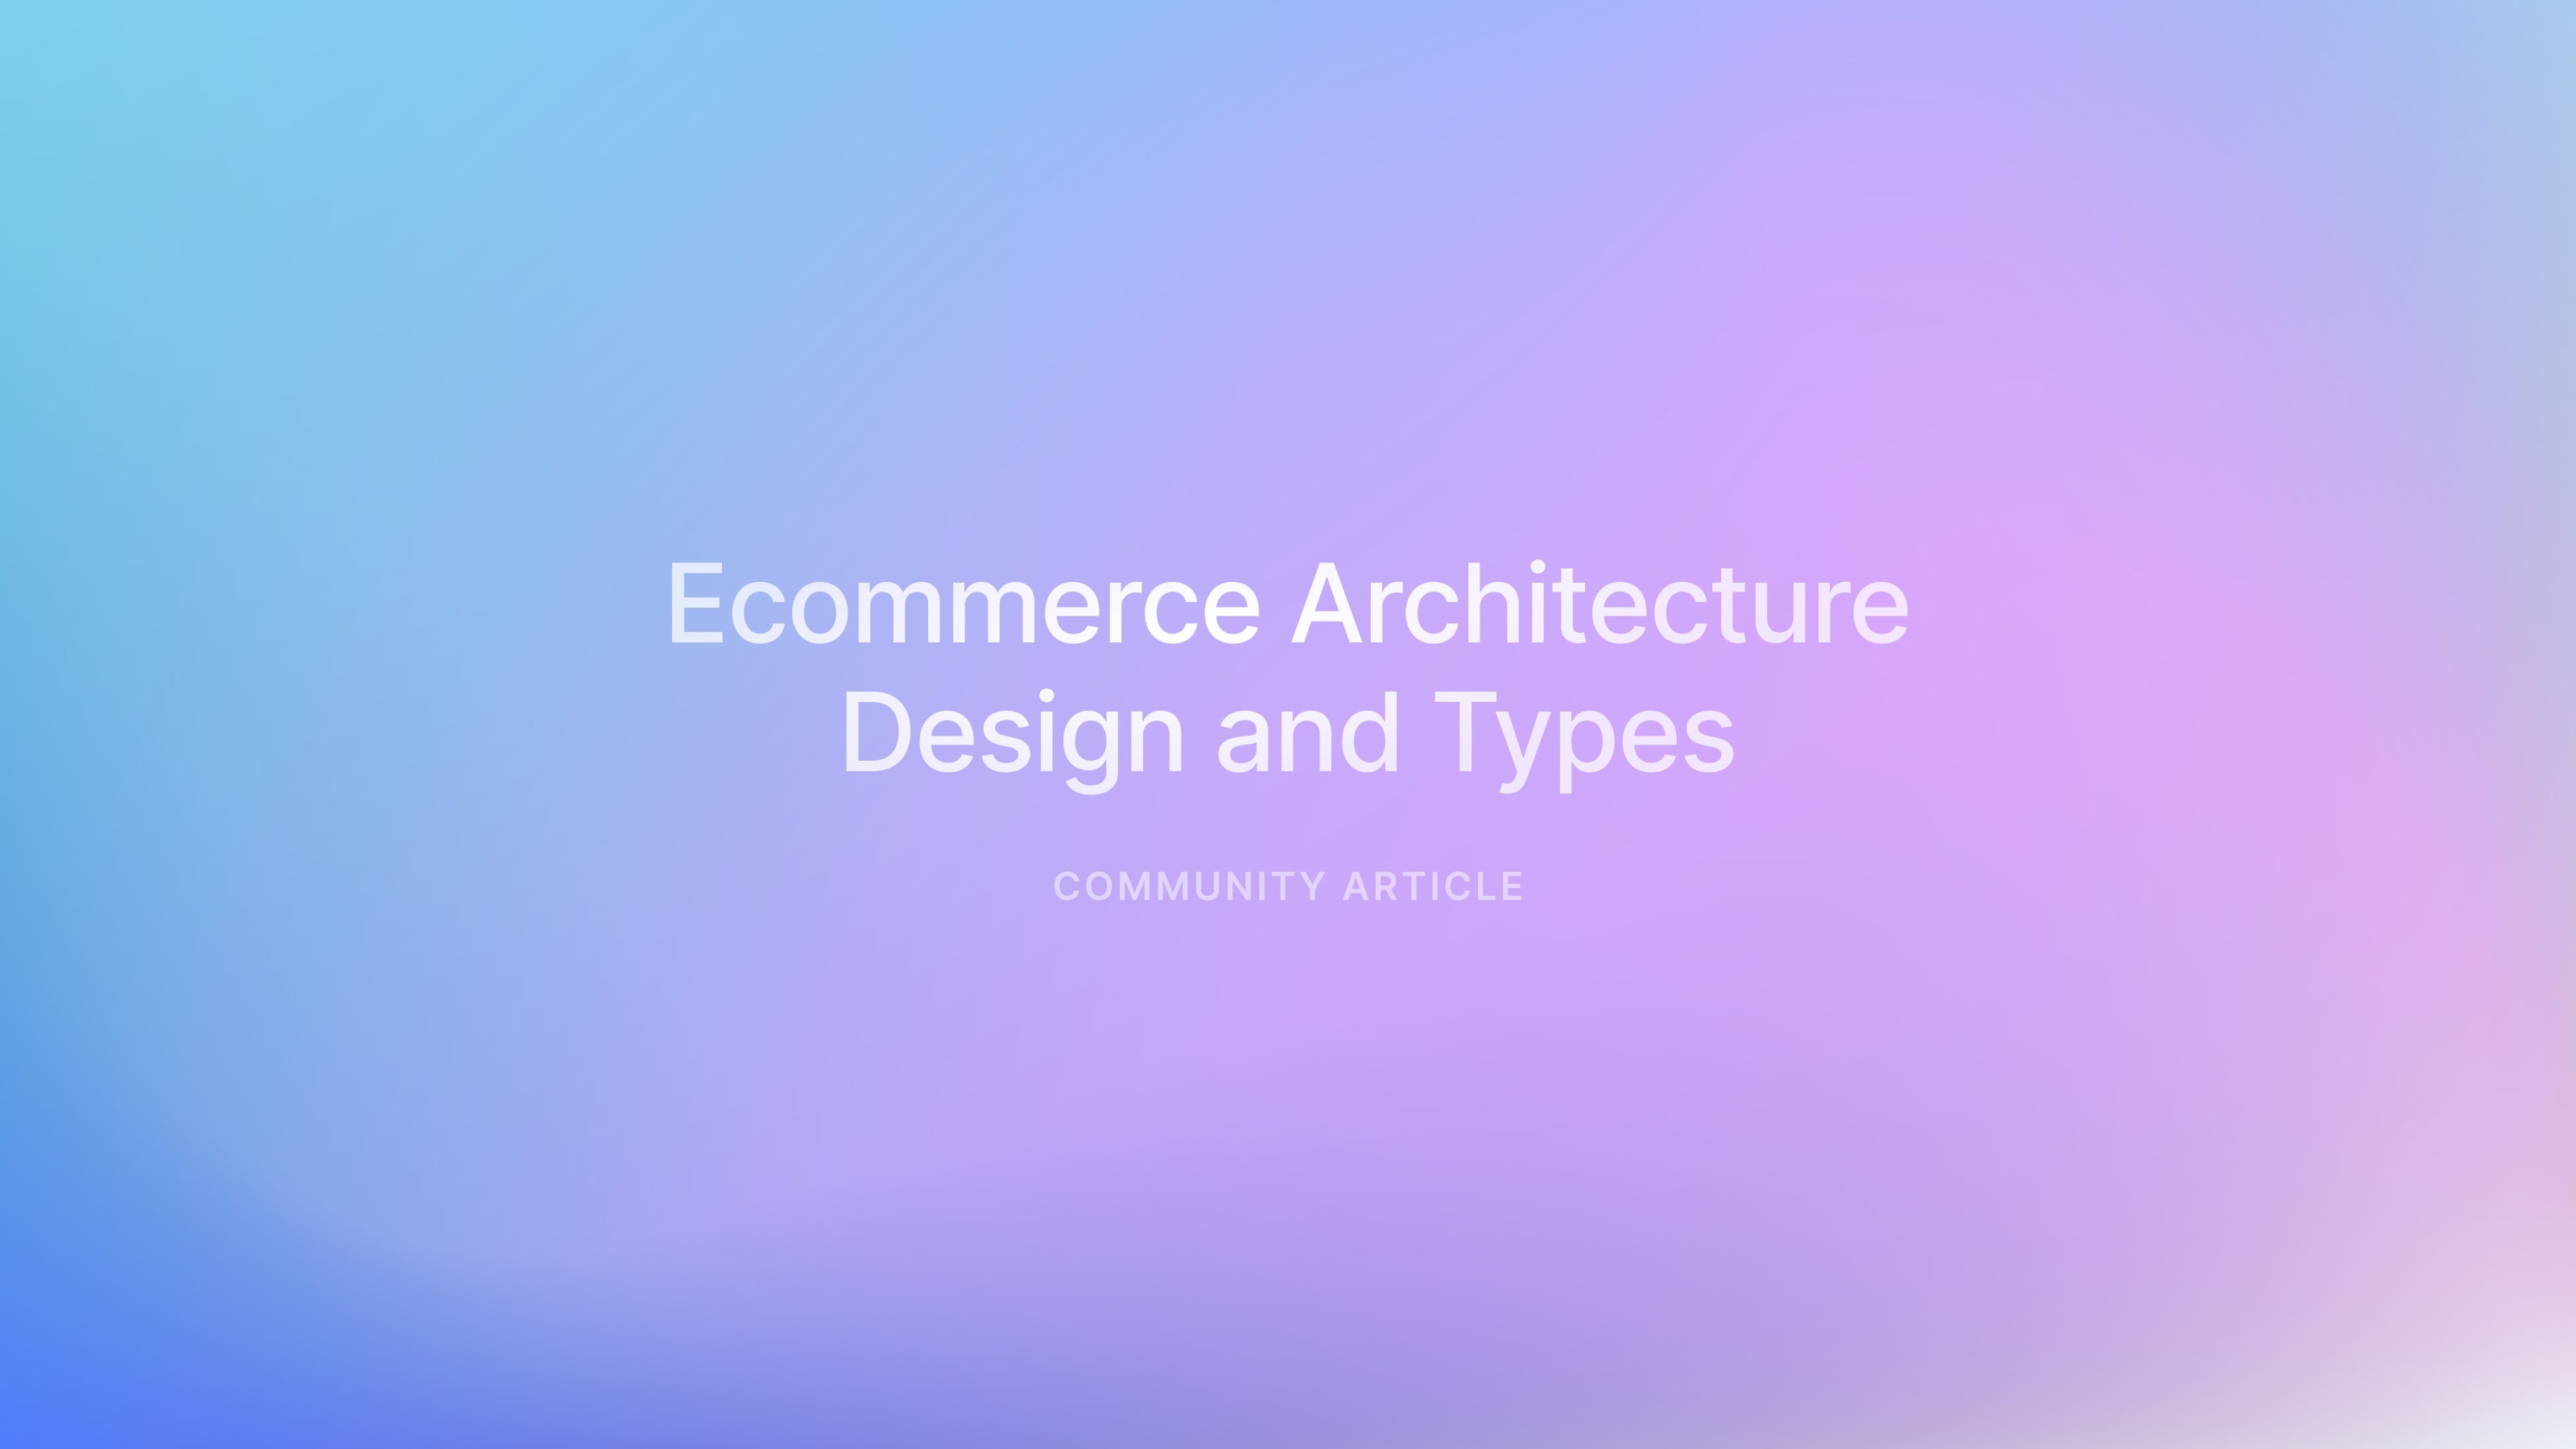 Ecommerce Architecture: Design and Types